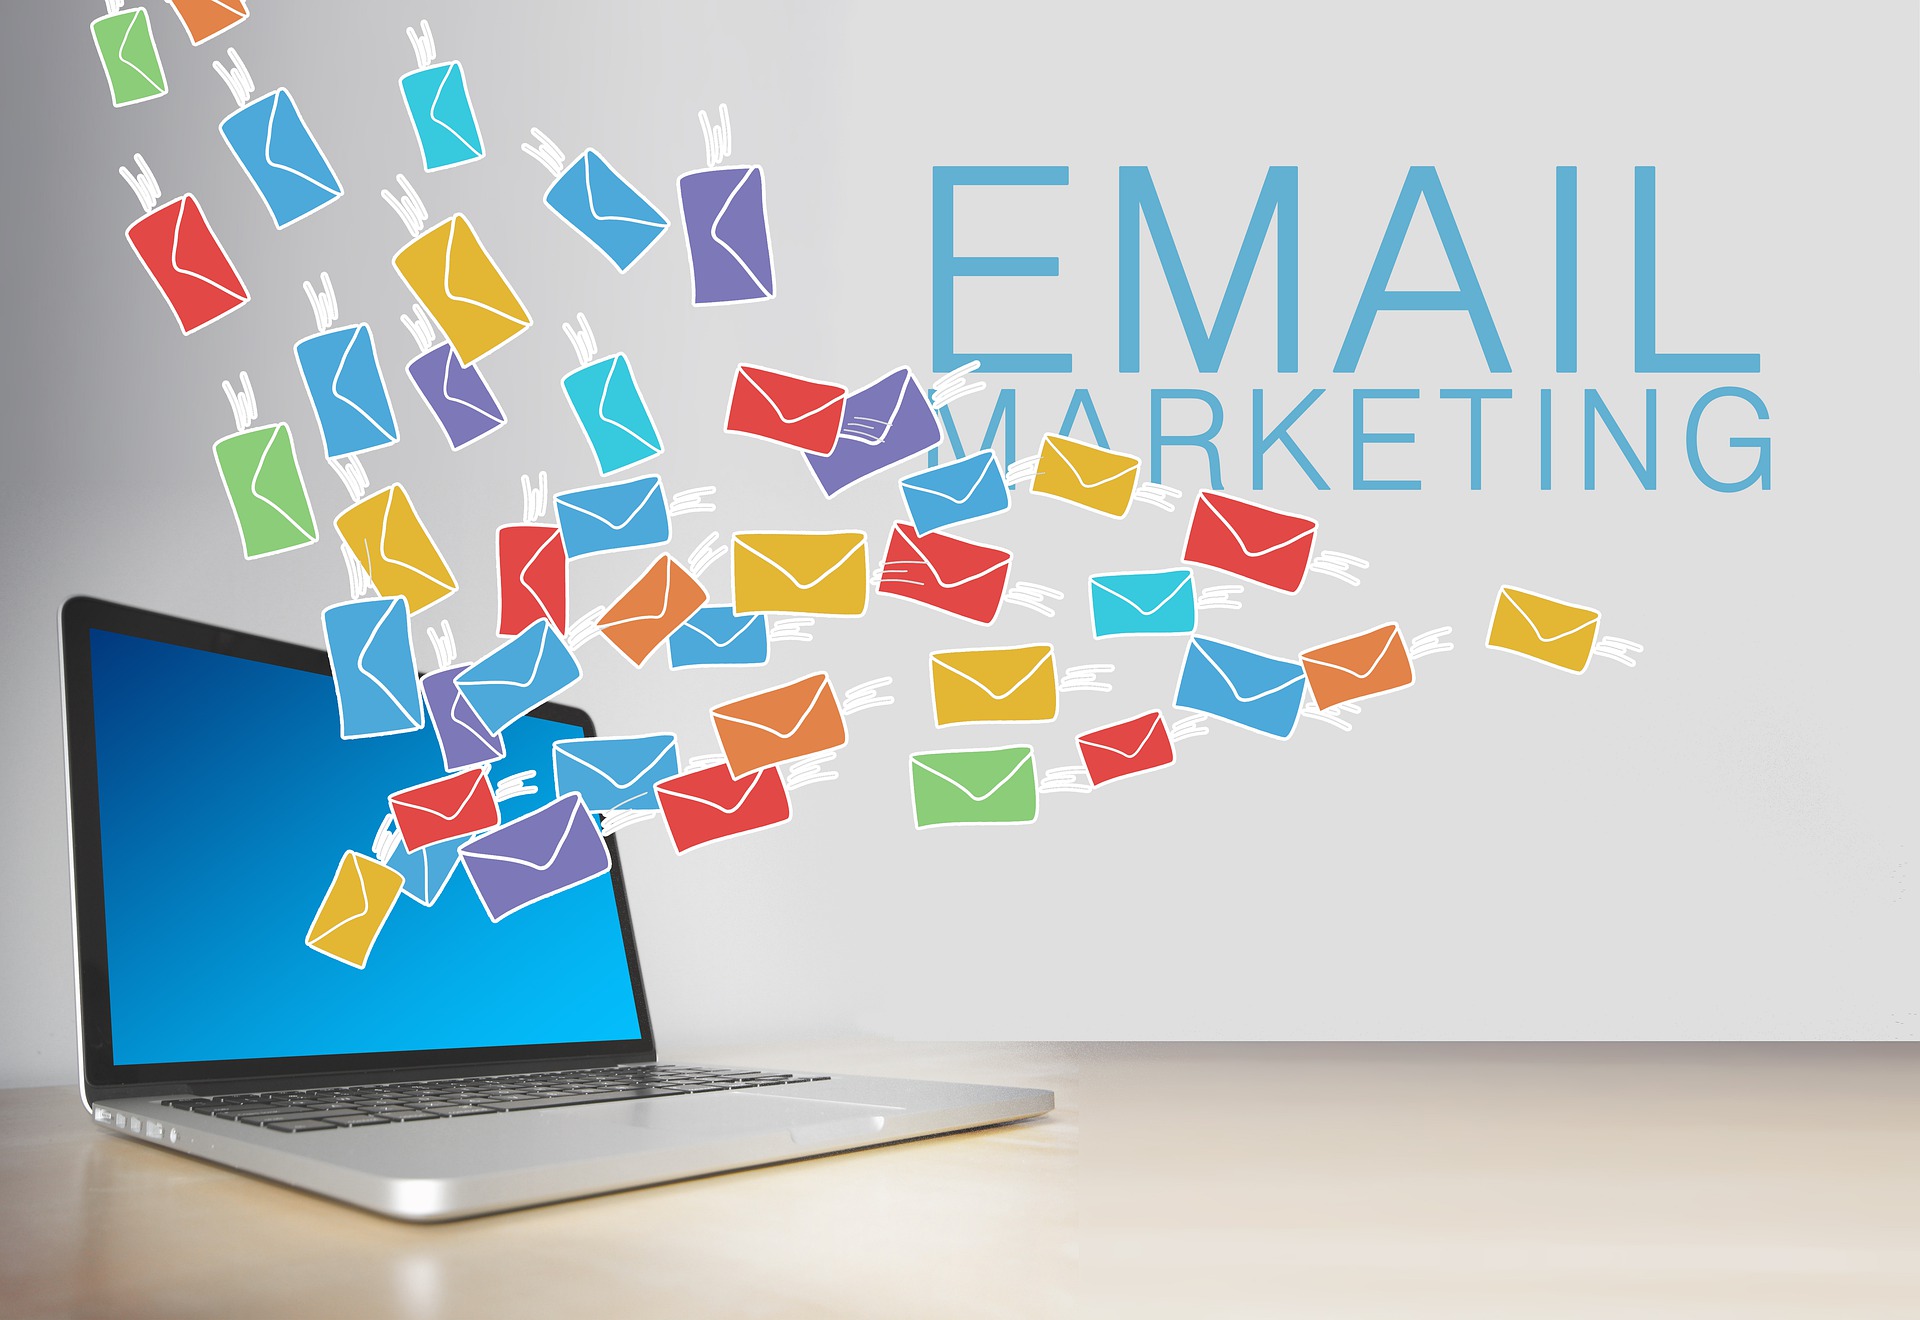 10 Best Email Marketing Tips To Boost Your Campaign In 2020 1